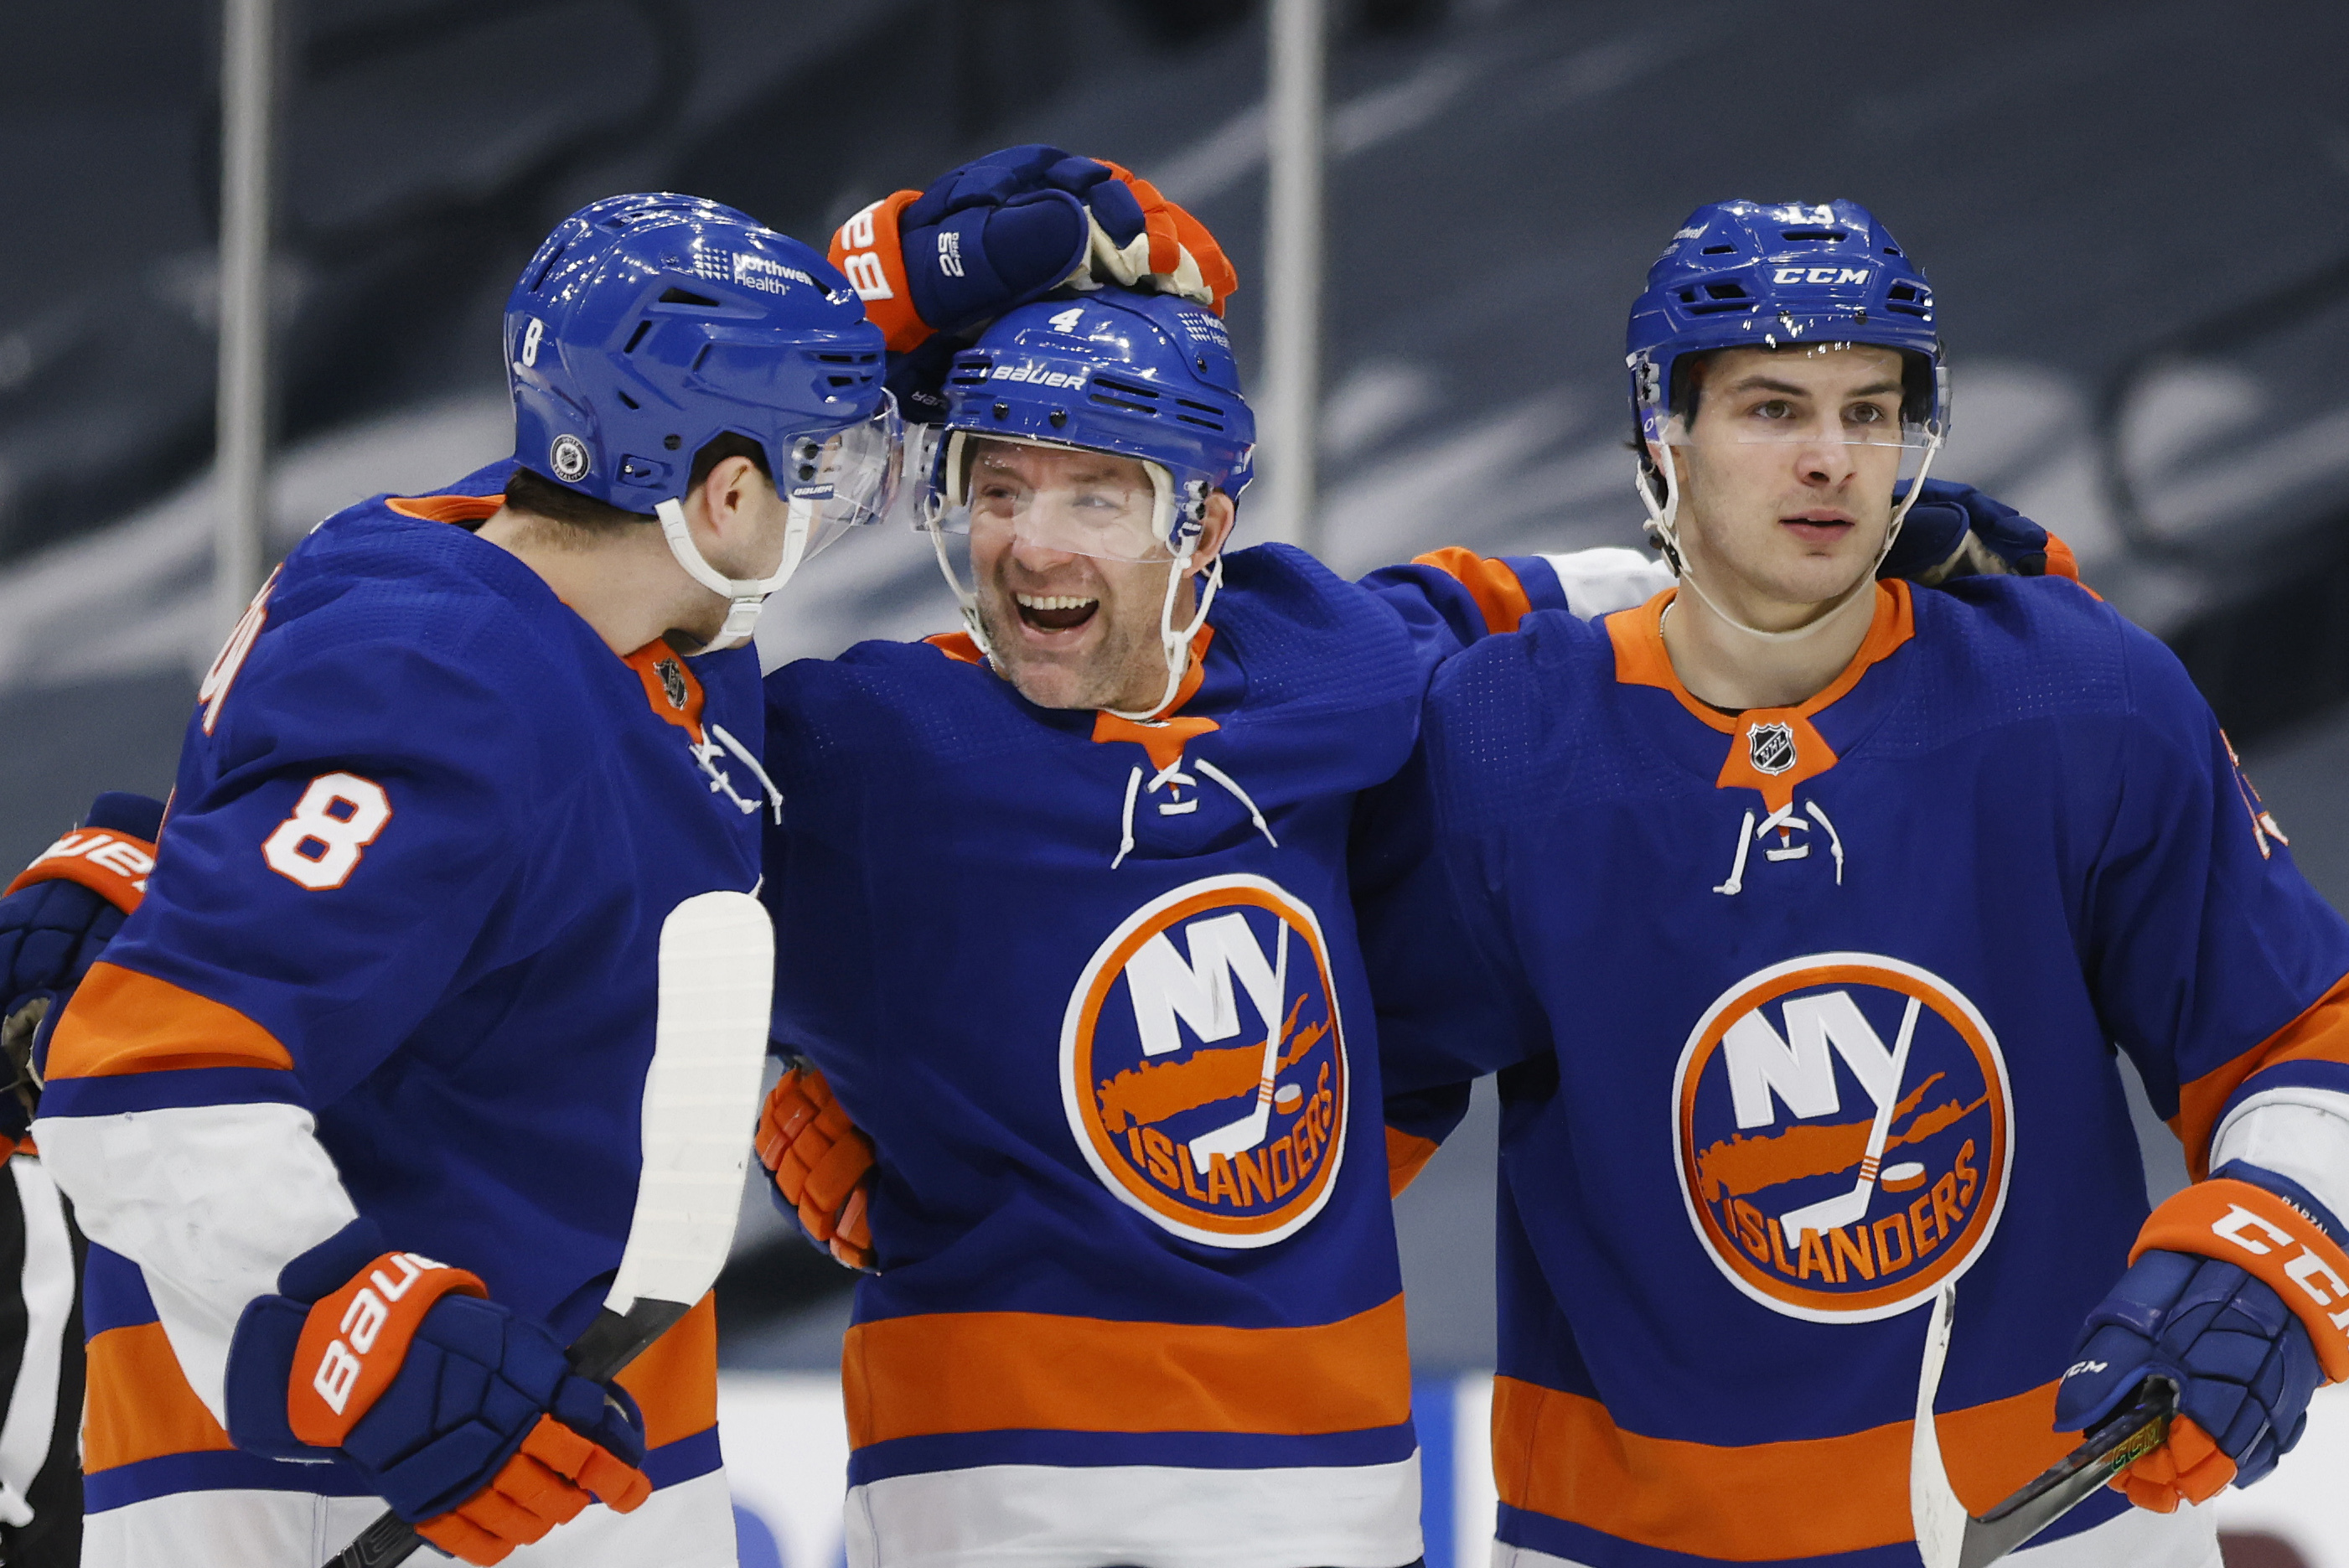 Islanders Clinch Postseason Berth Latest 21 Nhl Playoff Picture Bleacher Report Latest News Videos And Highlights